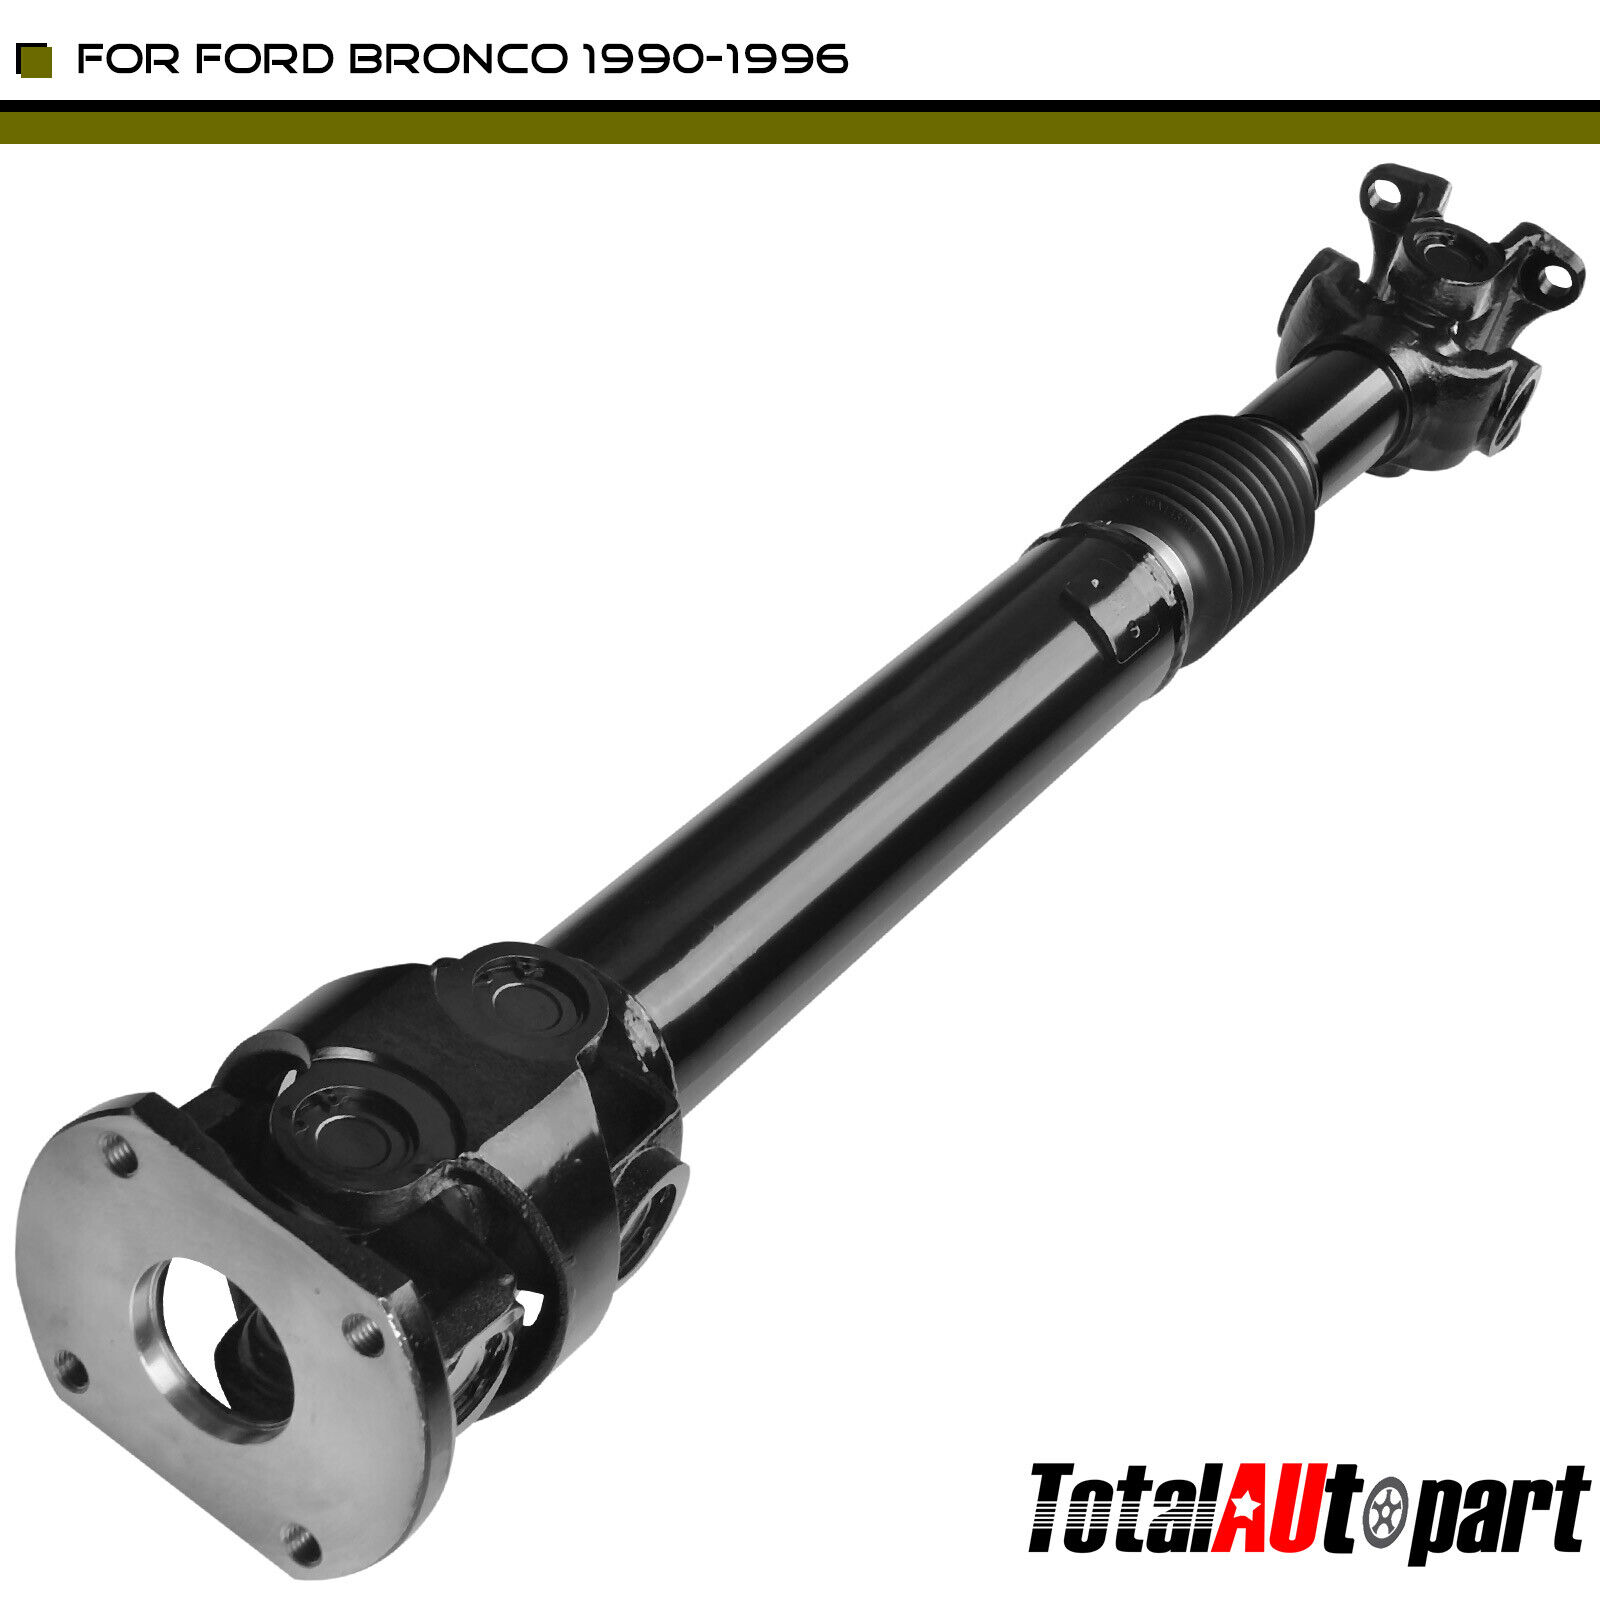 Rear Drive Shaft Assembly for Ford Bronco 1990-1996 4.9L 5.0L 4WD Manual Trans